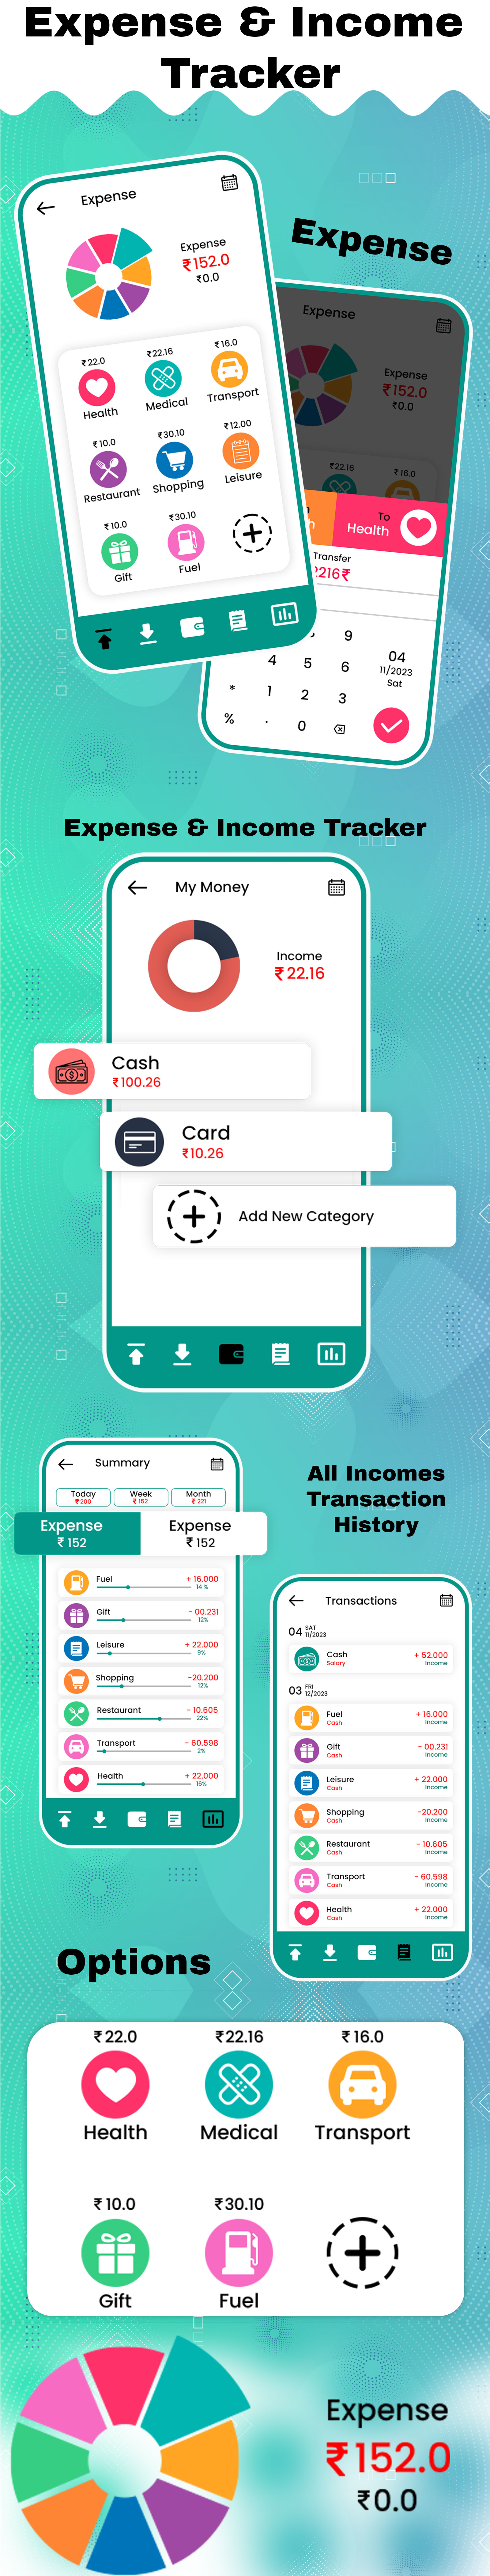 Money Management System, Budget Planner, Expense Manager, Admob Ads, Android